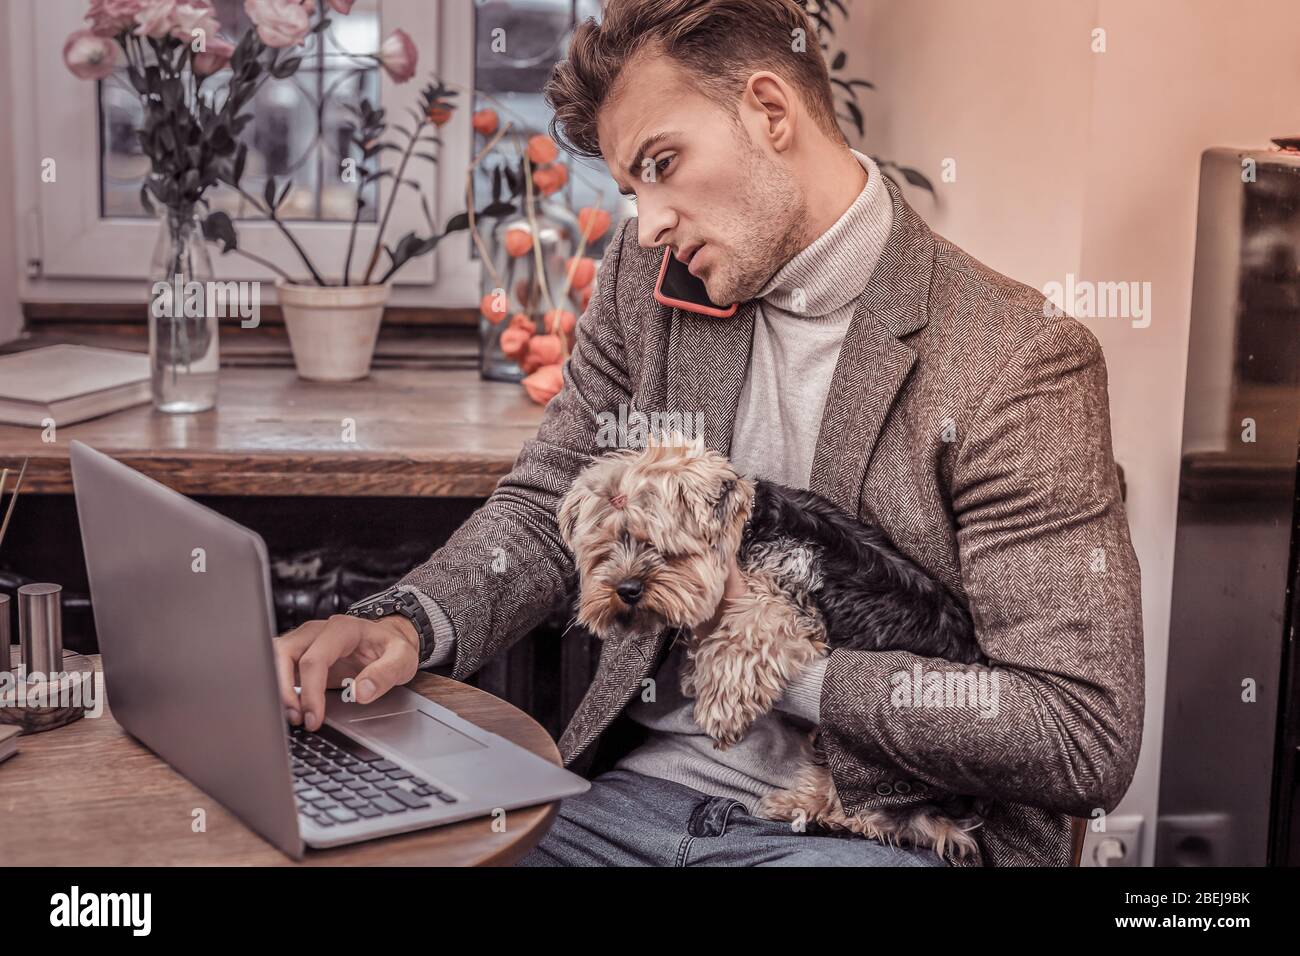 Portrait of a busy hardworking man sitting in cafe with dog on a good day Stock Photo